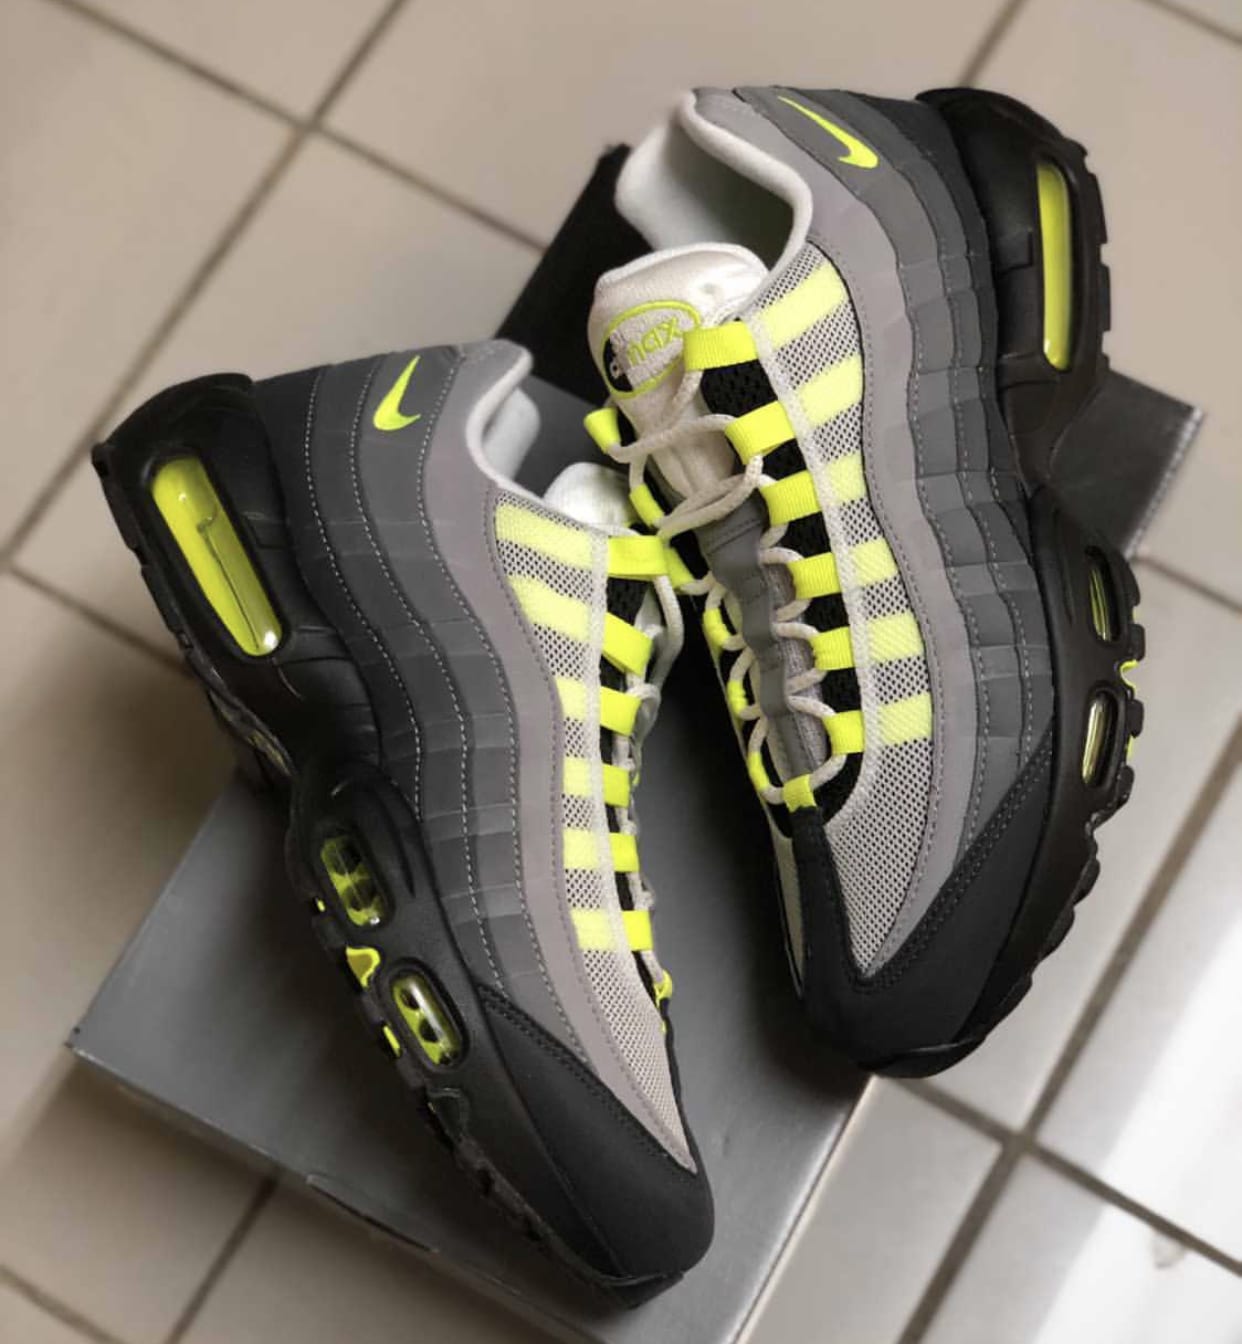 nike air max 95 release dates 2020